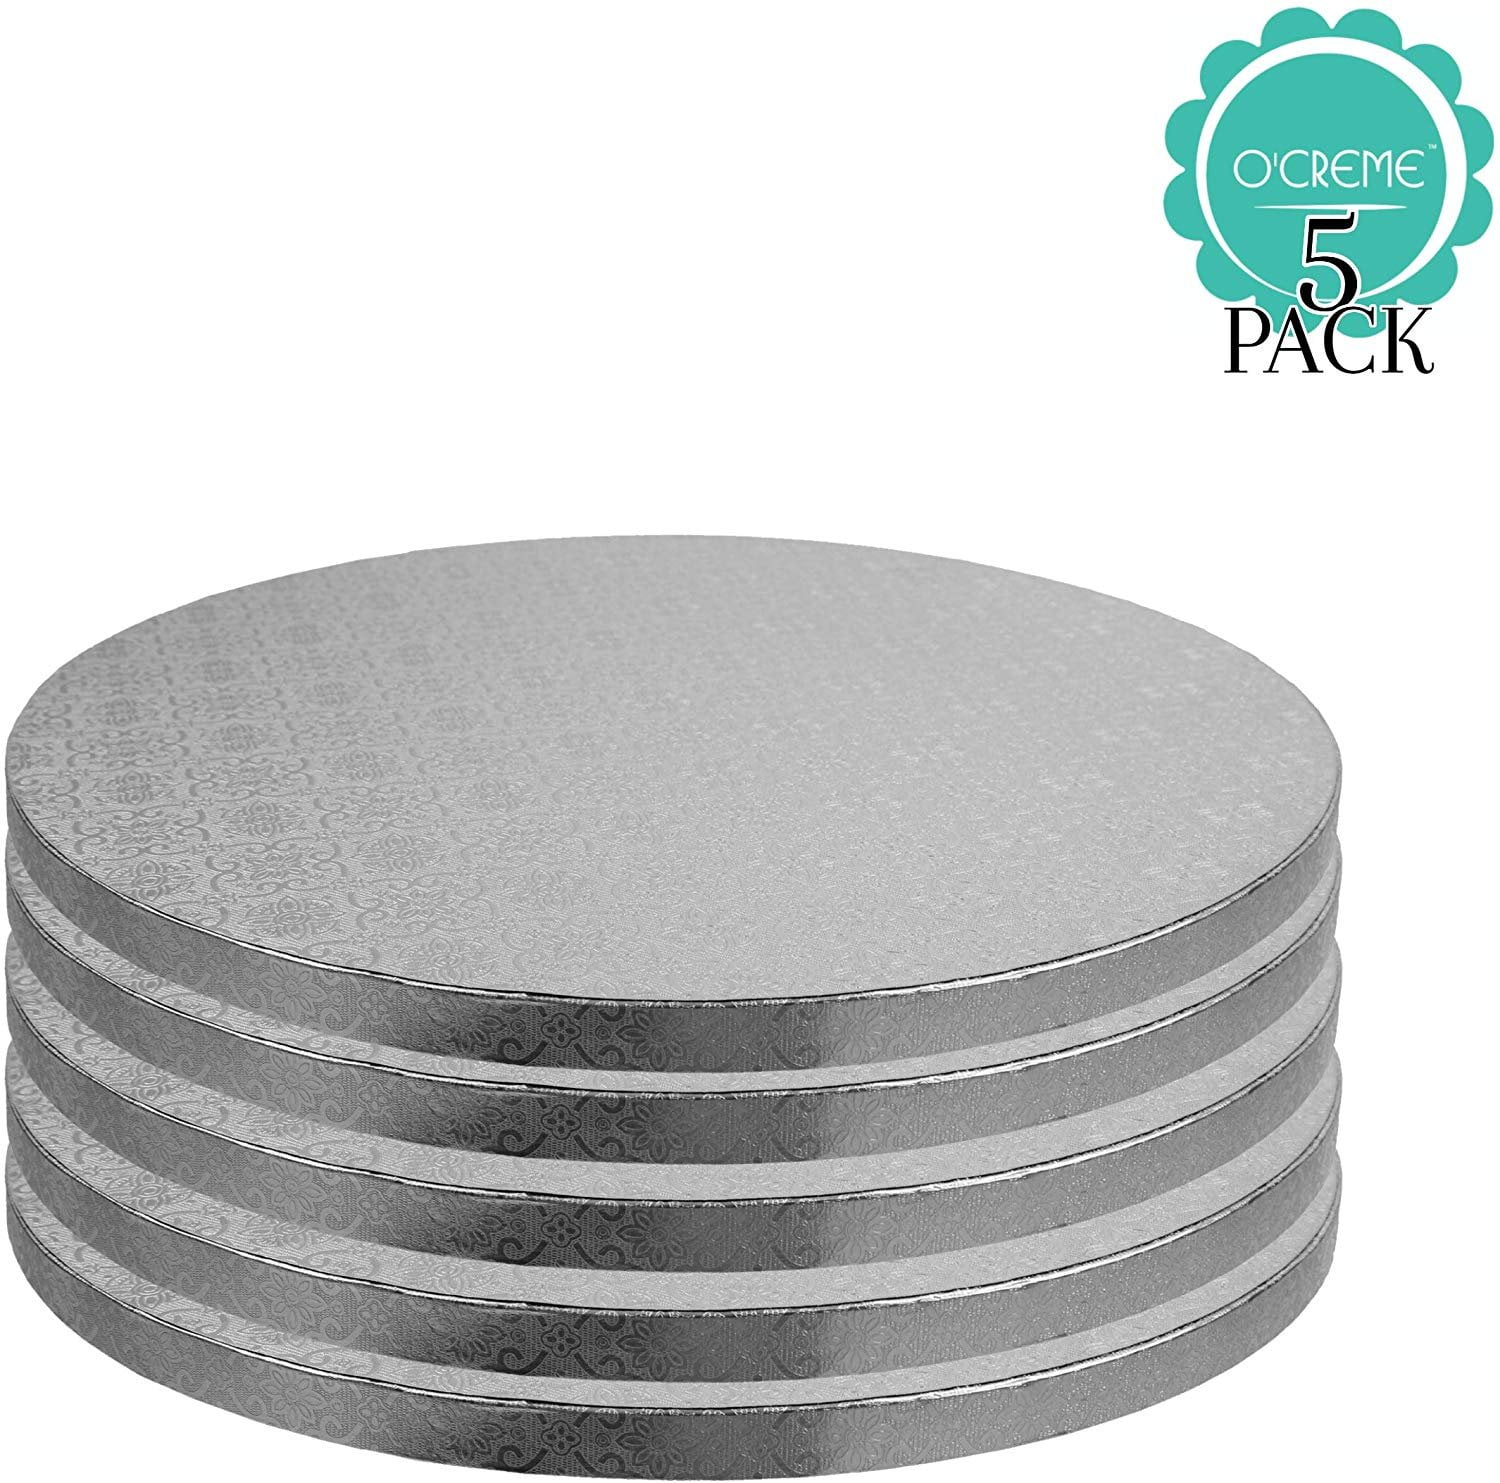 Sturdy 1/2 Inch Thick Fully Wrapped Edges White, 6-Pack Cake Drums Round 8 Inches